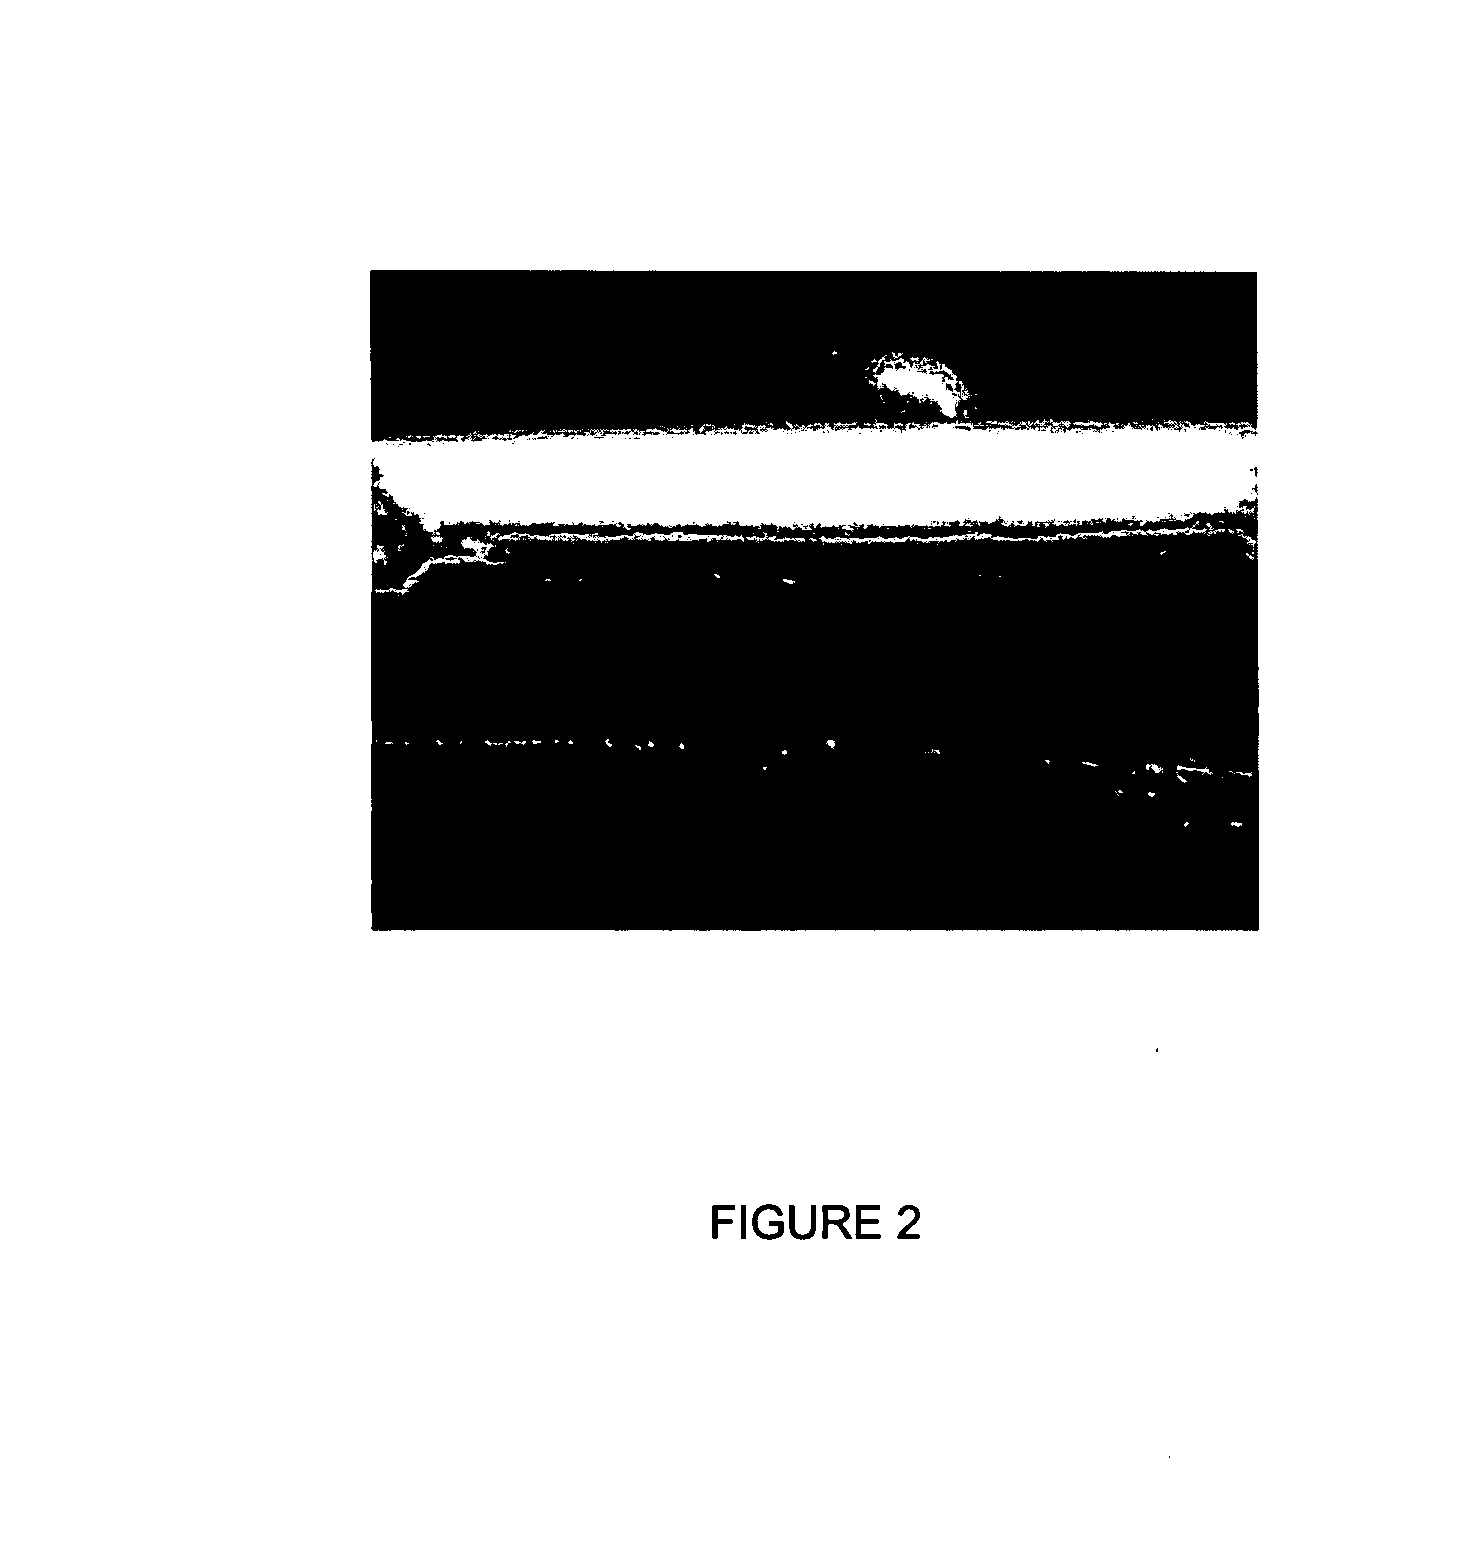 Methods for making and using composites, polymer scaffolds, and composite scaffolds